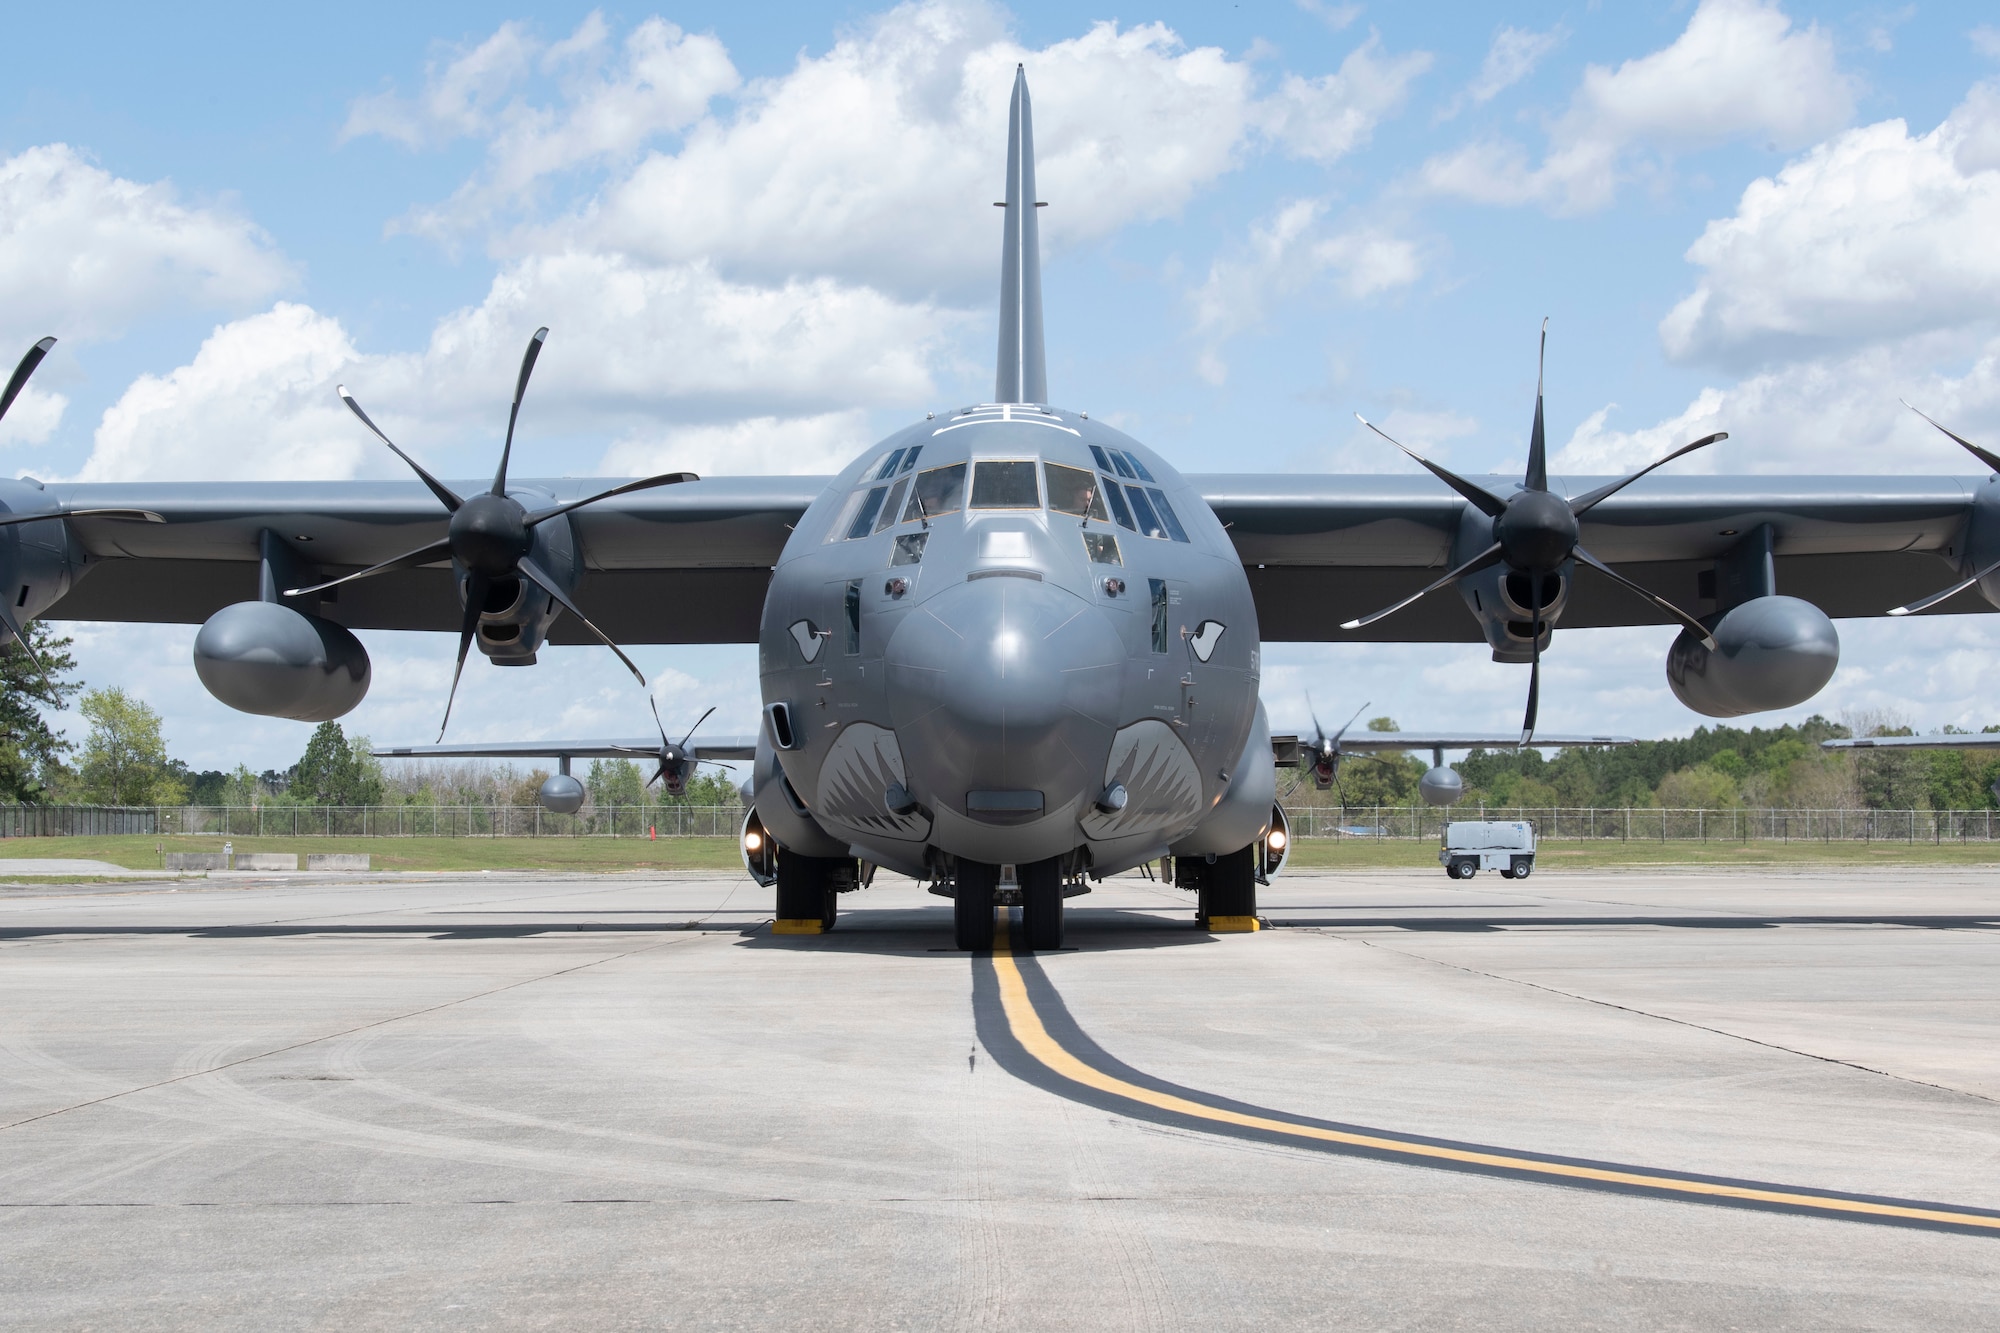 HC-130J Combat King II 13-5785 awaits the ground crew after landing at Moody Air Force Base, Georgia, March 25, 2022. After being dedicated as the 23rd Wing’s Flagships, HC-130J 13-5785 was dubbed “The Whale Shark”. (U.S. Air Force photo by Senior Airman Thomas Johns)